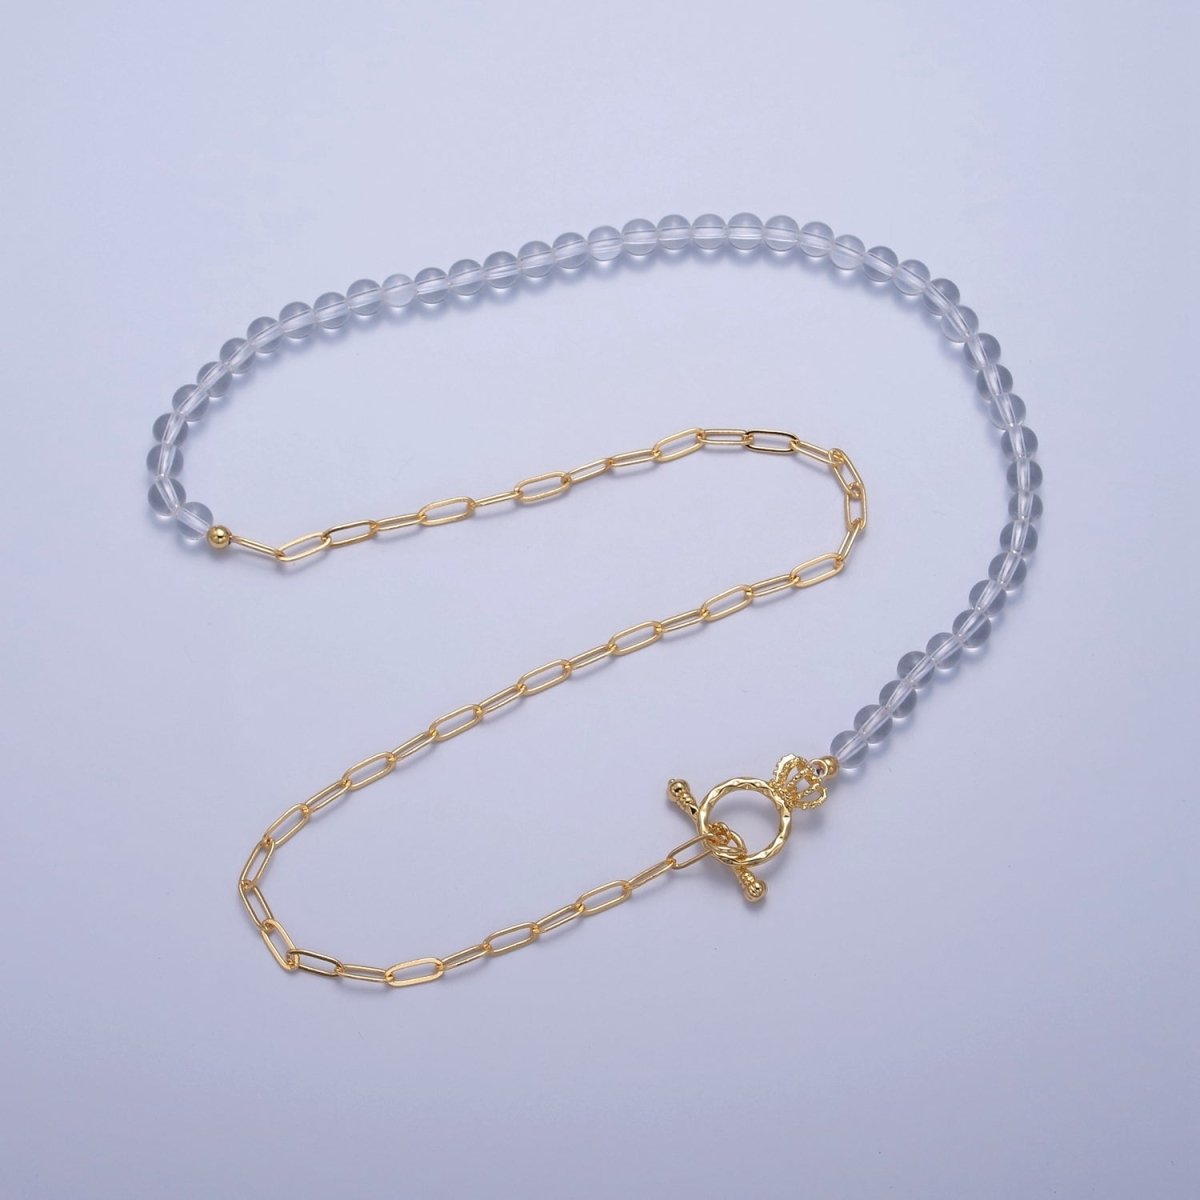 Dainty Half Bead Half Link Chain Necklace, 24k Gold Filled Paperclip Chain with Clear Quartz Necklace Toggle Clasp | WA-967 Clearance Pricing - DLUXCA